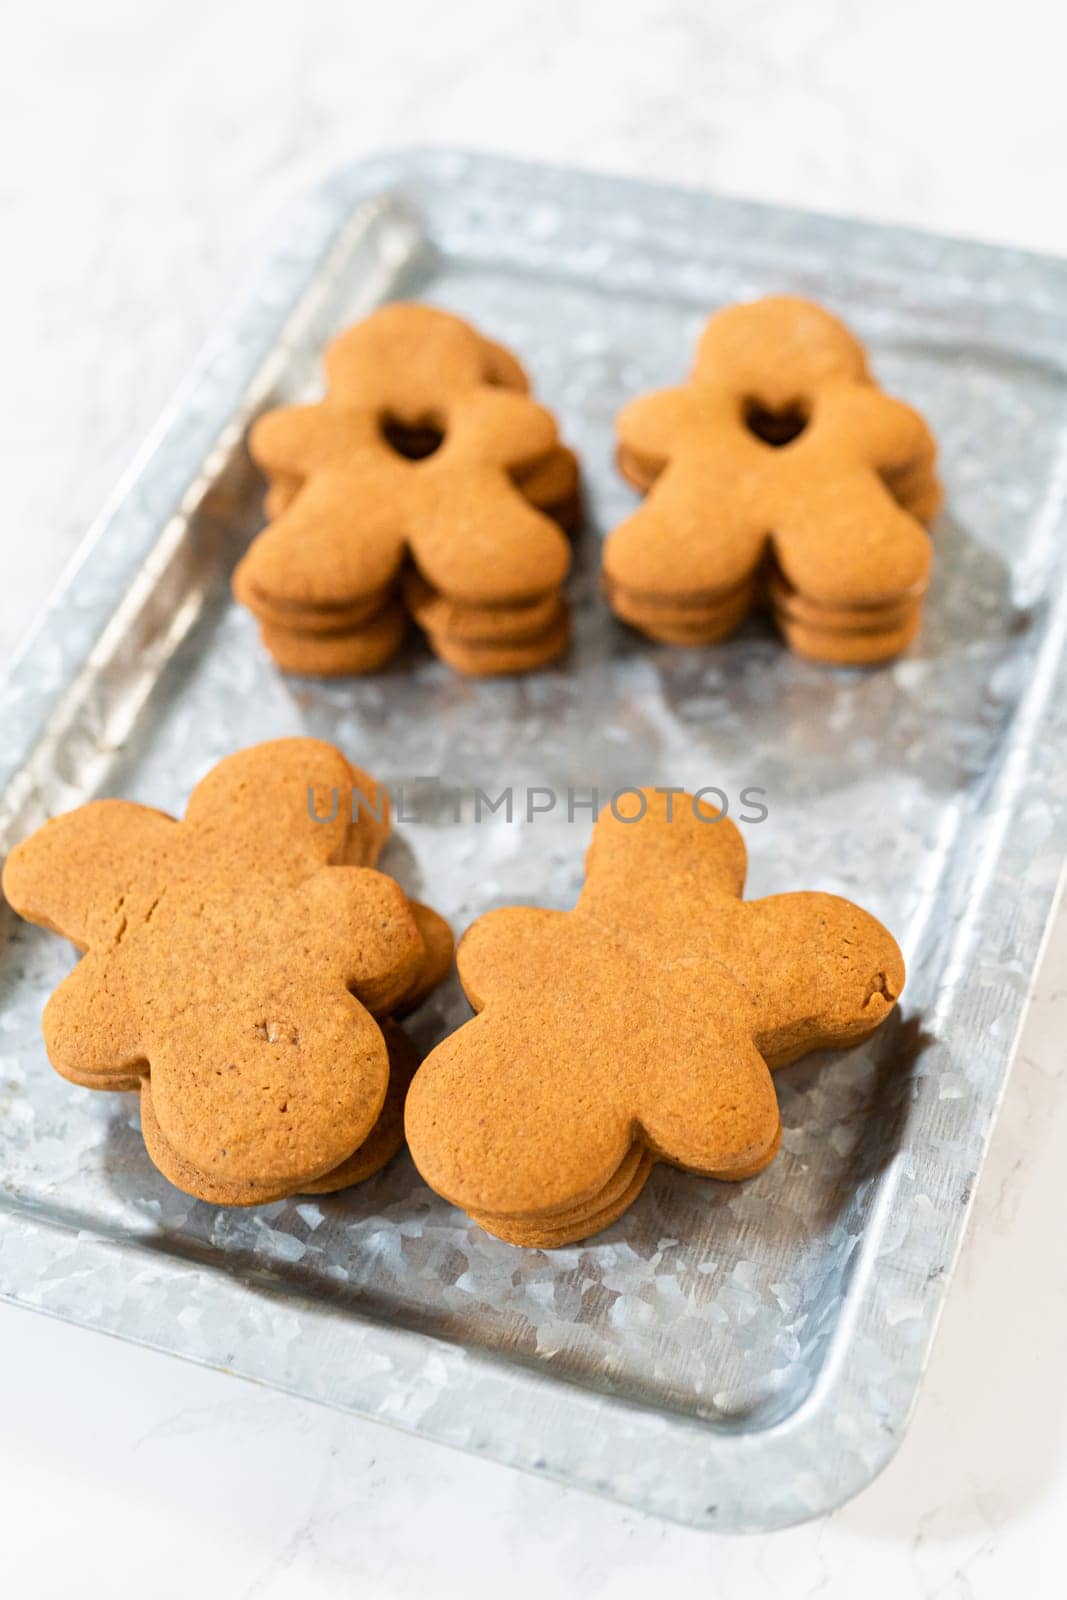 Gingerbread cookies, including a gingerbread man with a heart-shaped cutout, rest on a rustic metal tray against a marble countertop.